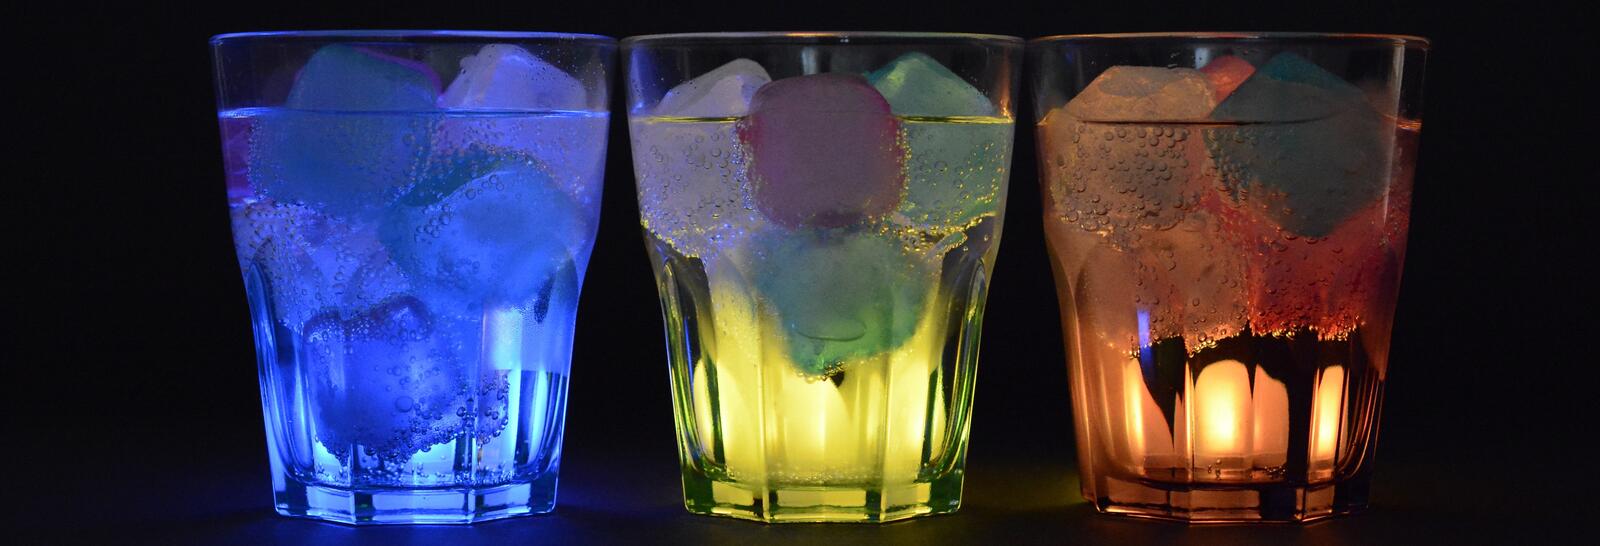 Free photo Three iced cocktail glasses